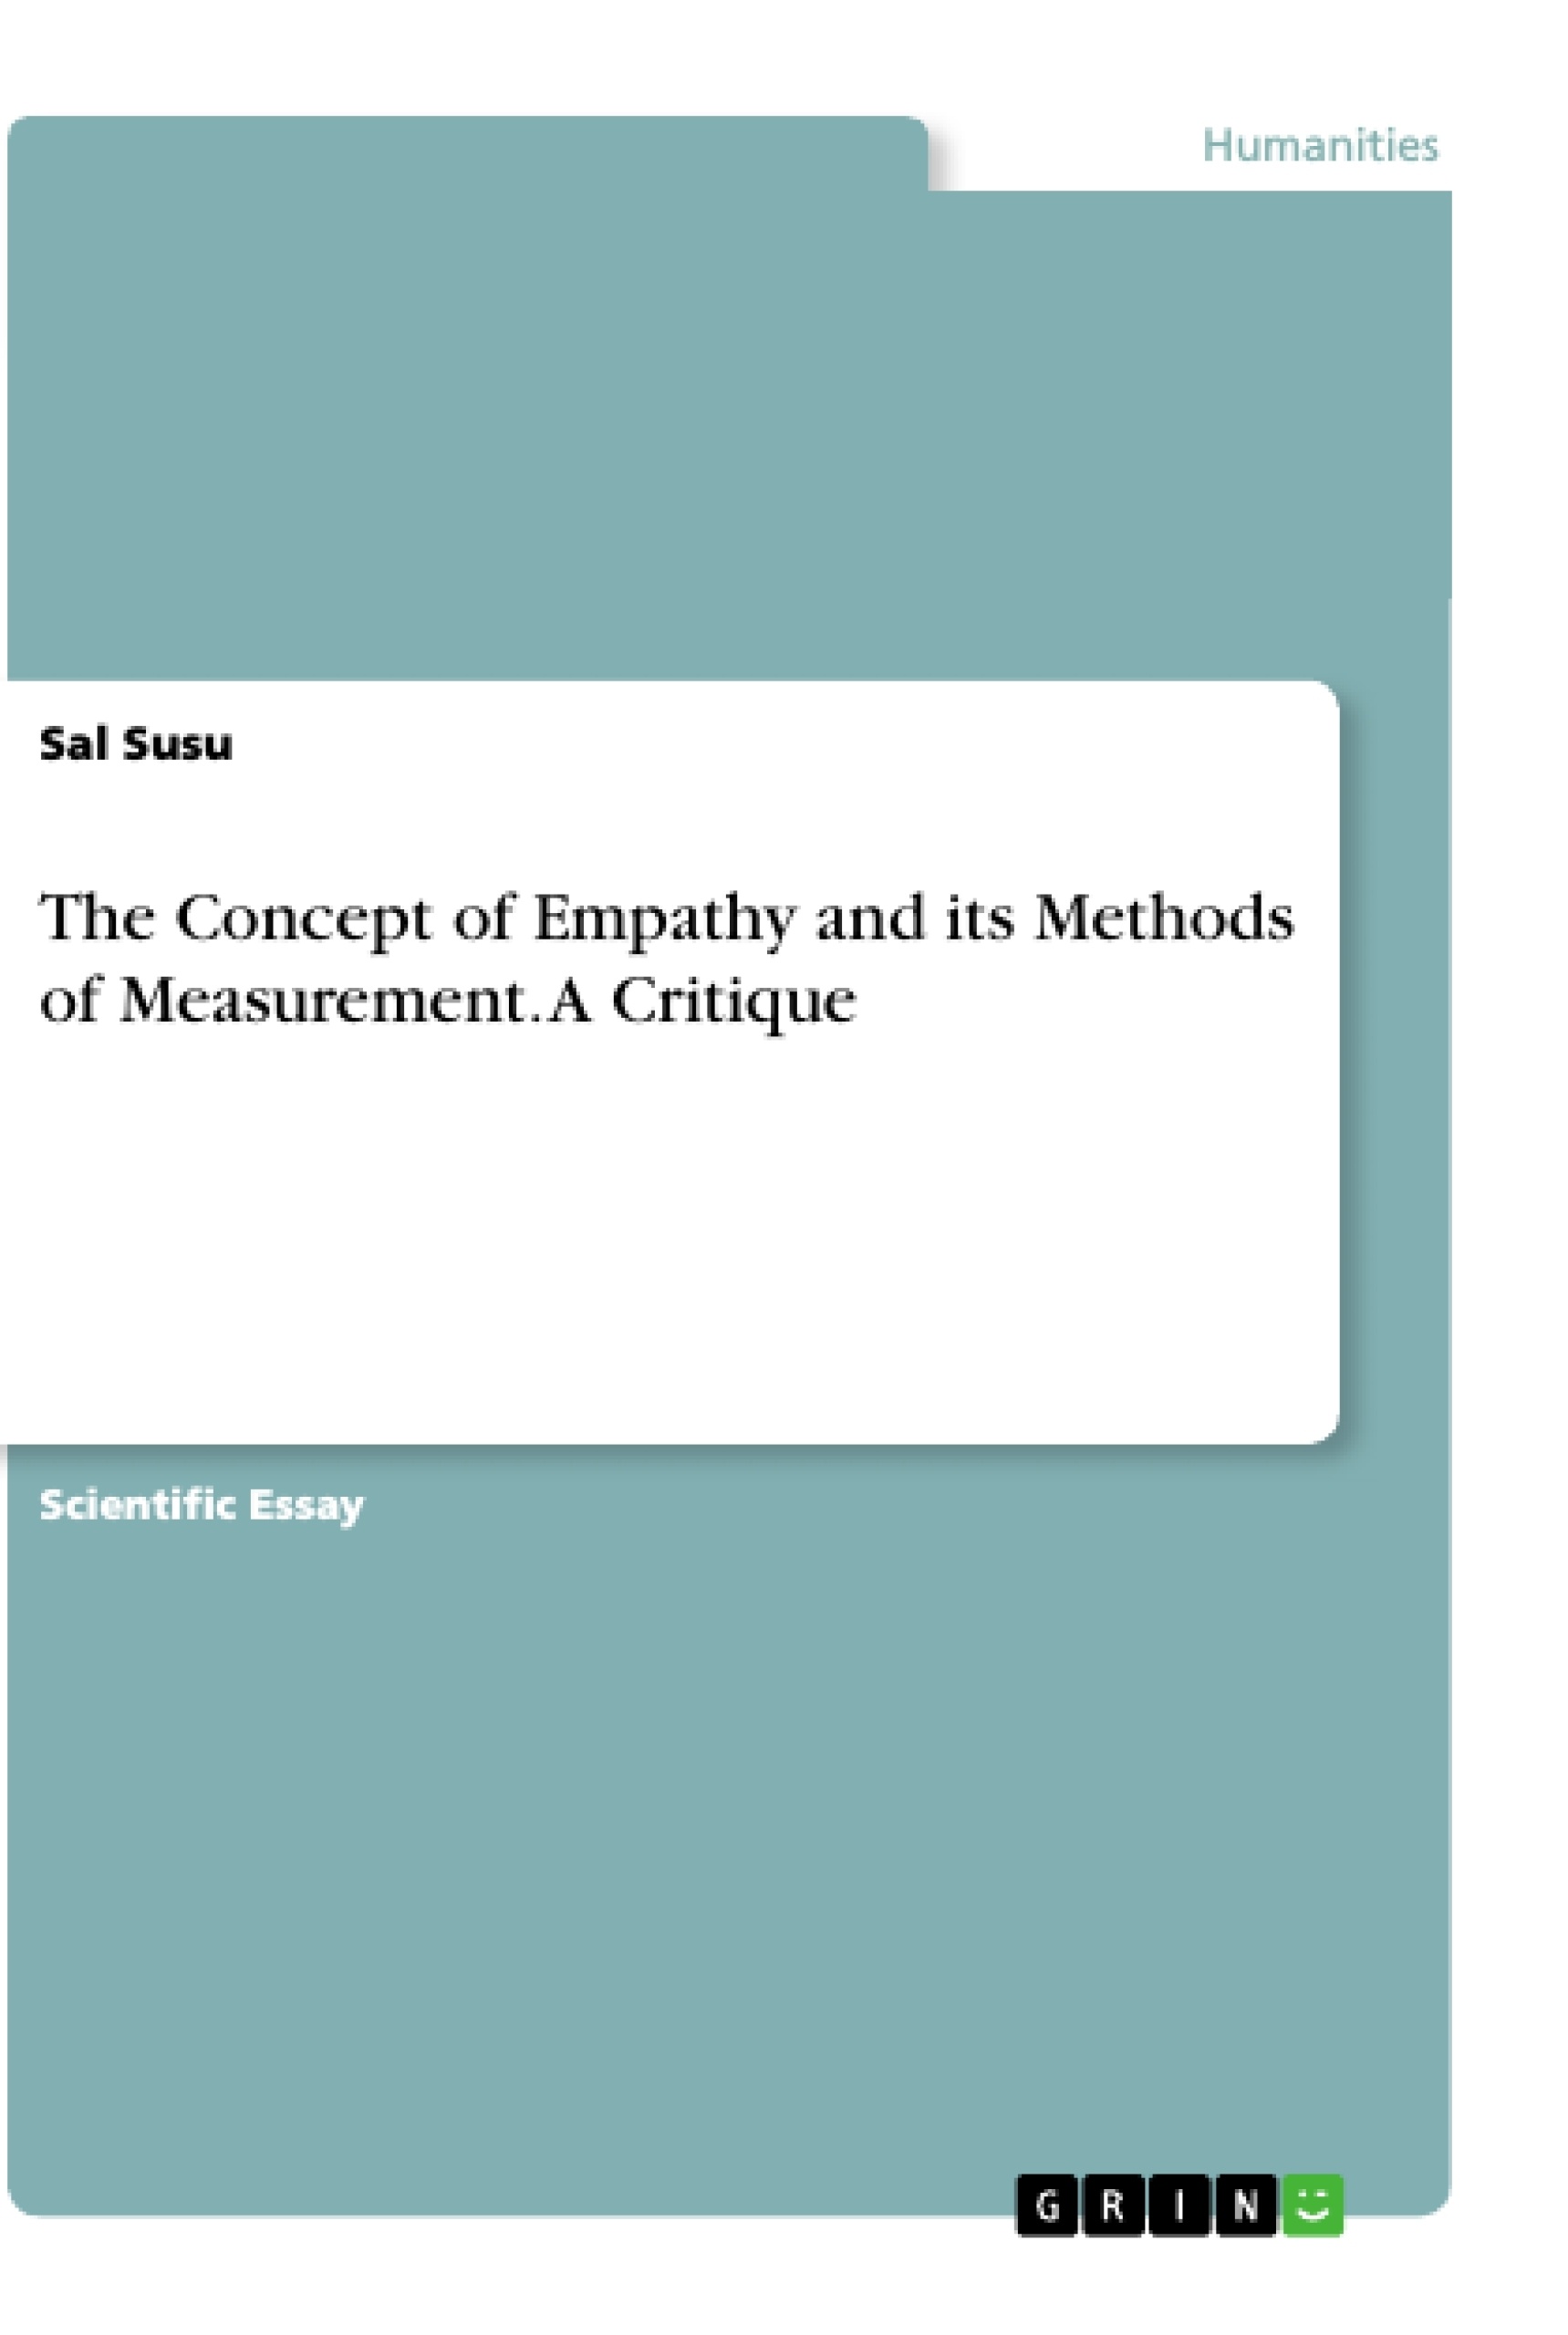 Titel: The Concept of Empathy and its Methods of Measurement. A Critique